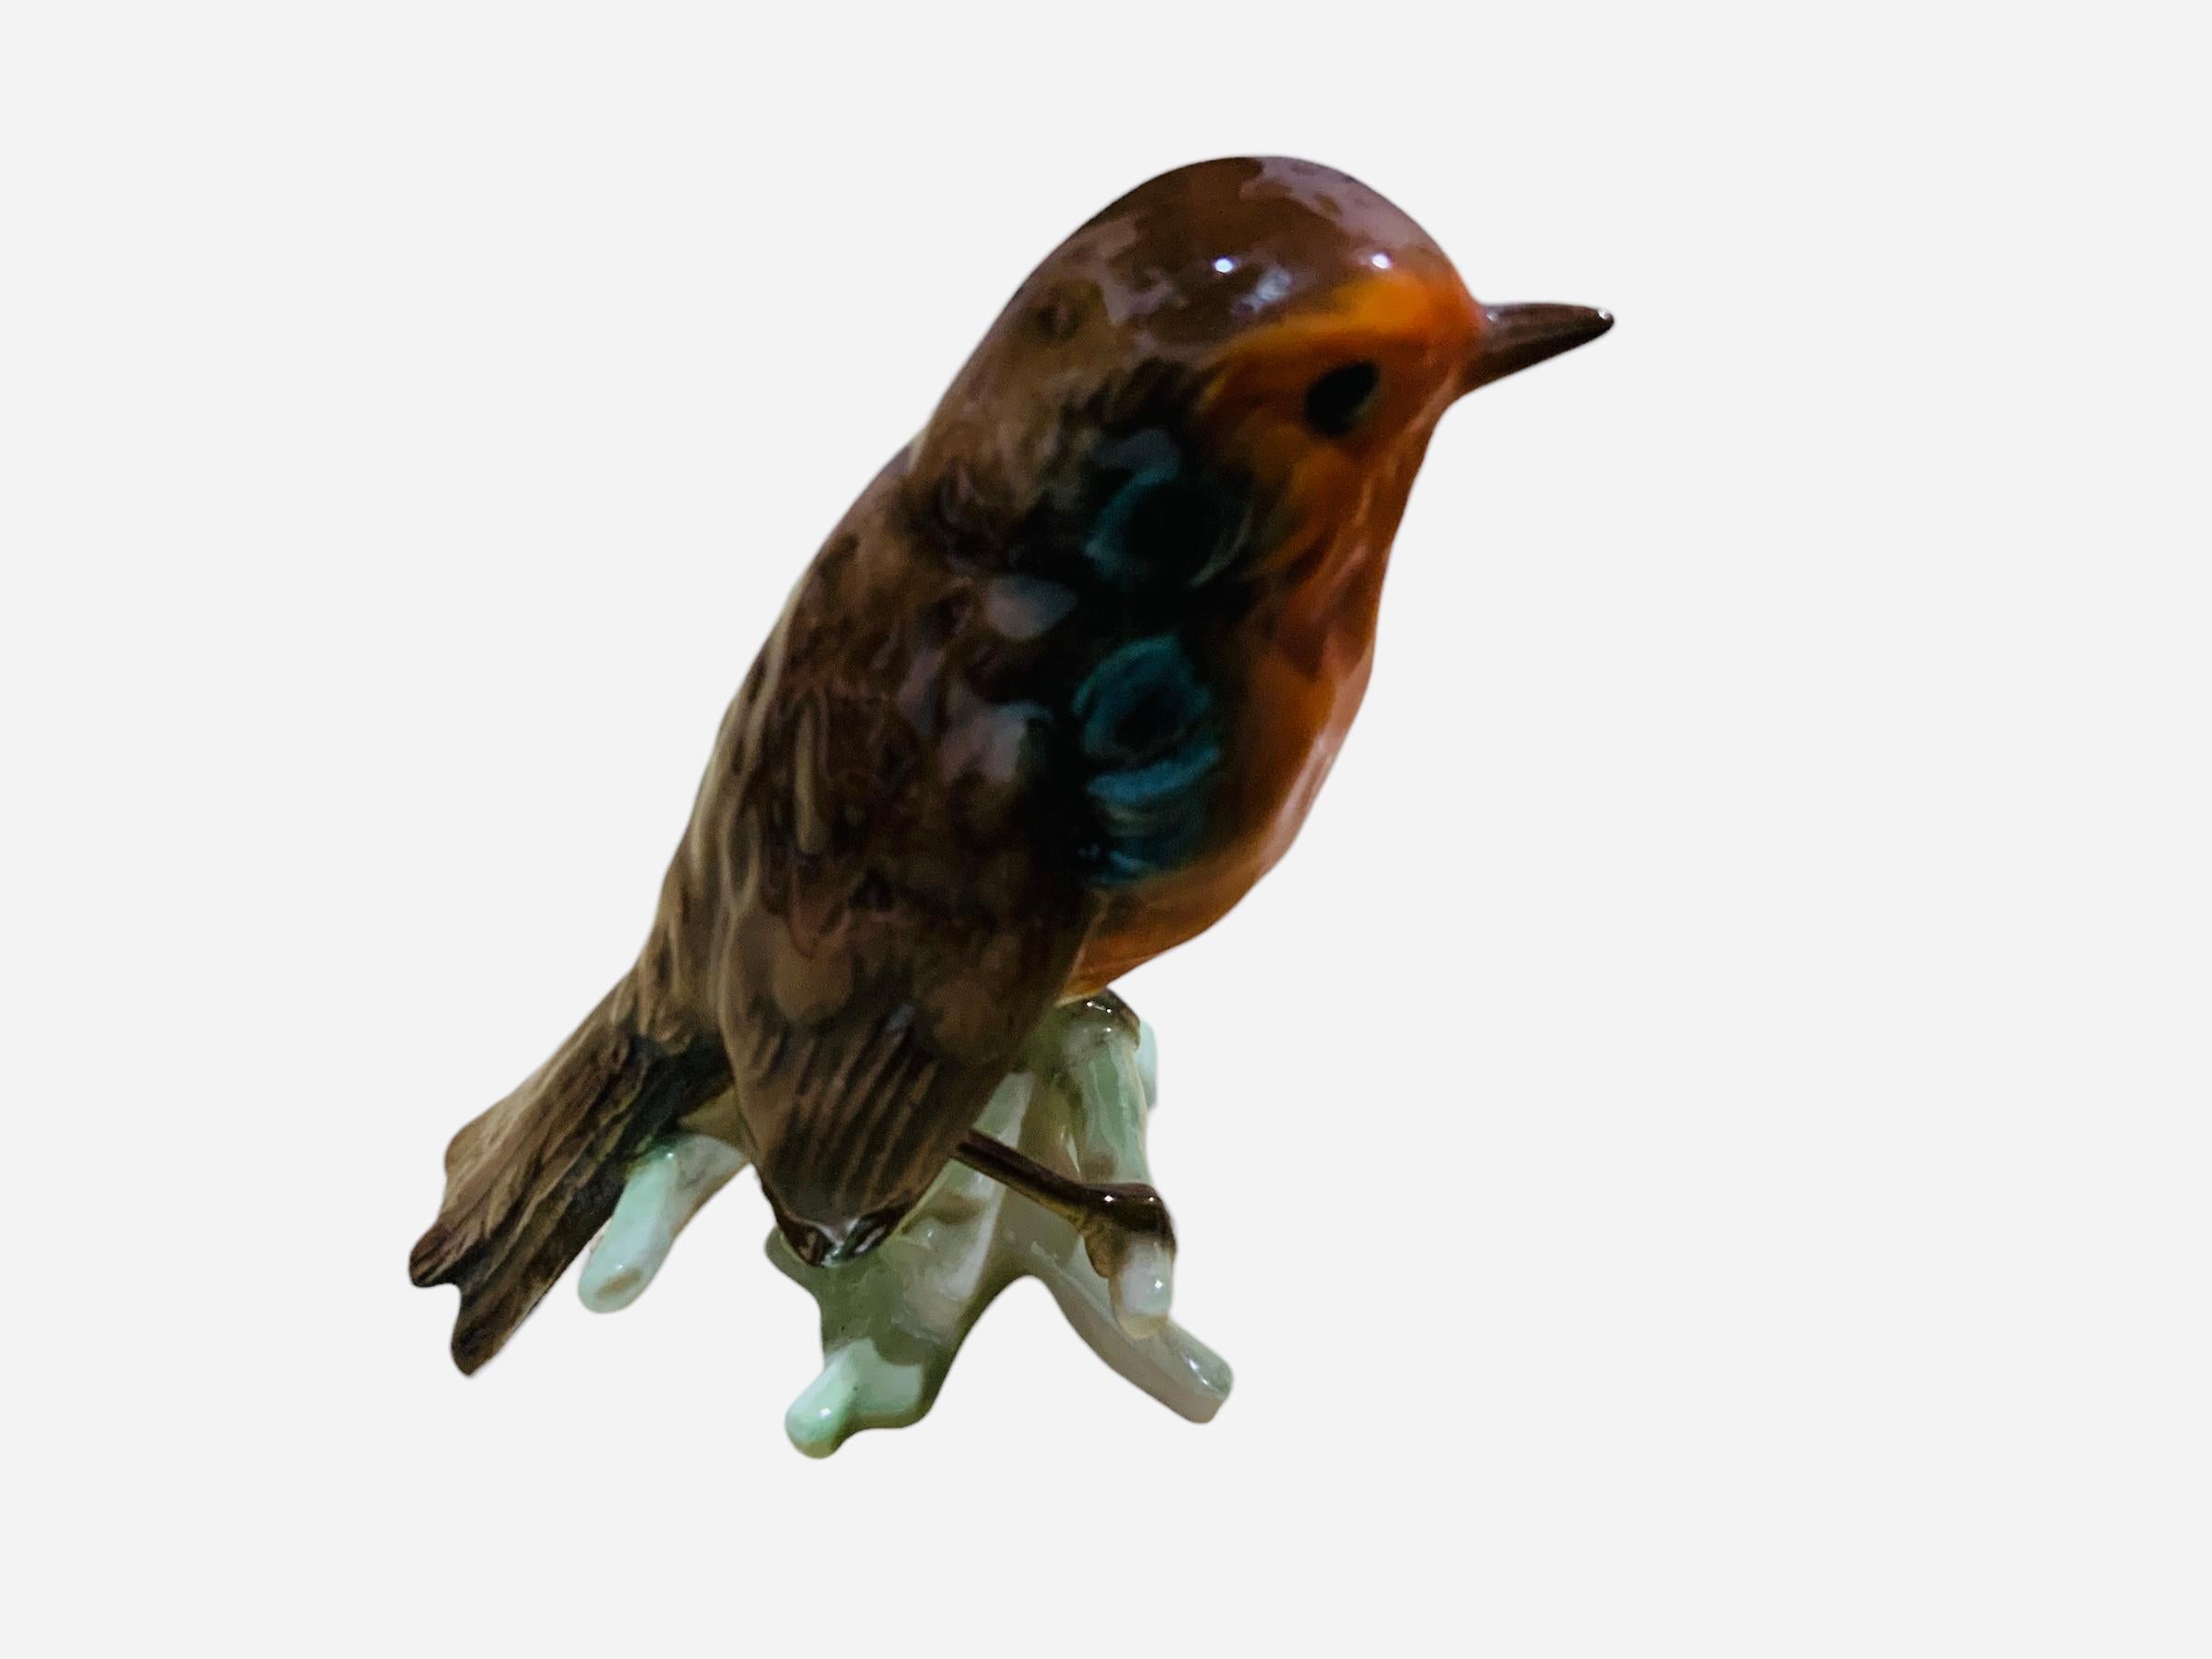 This is a Goebel porcelain figurine of a bird. It depicts a very well done hand painted extreme agile Red-Rumped Swallow. It is standing up over a branch of a tree. It is hallmarked Goebel, W.Germany below the asymmetrical light green base.